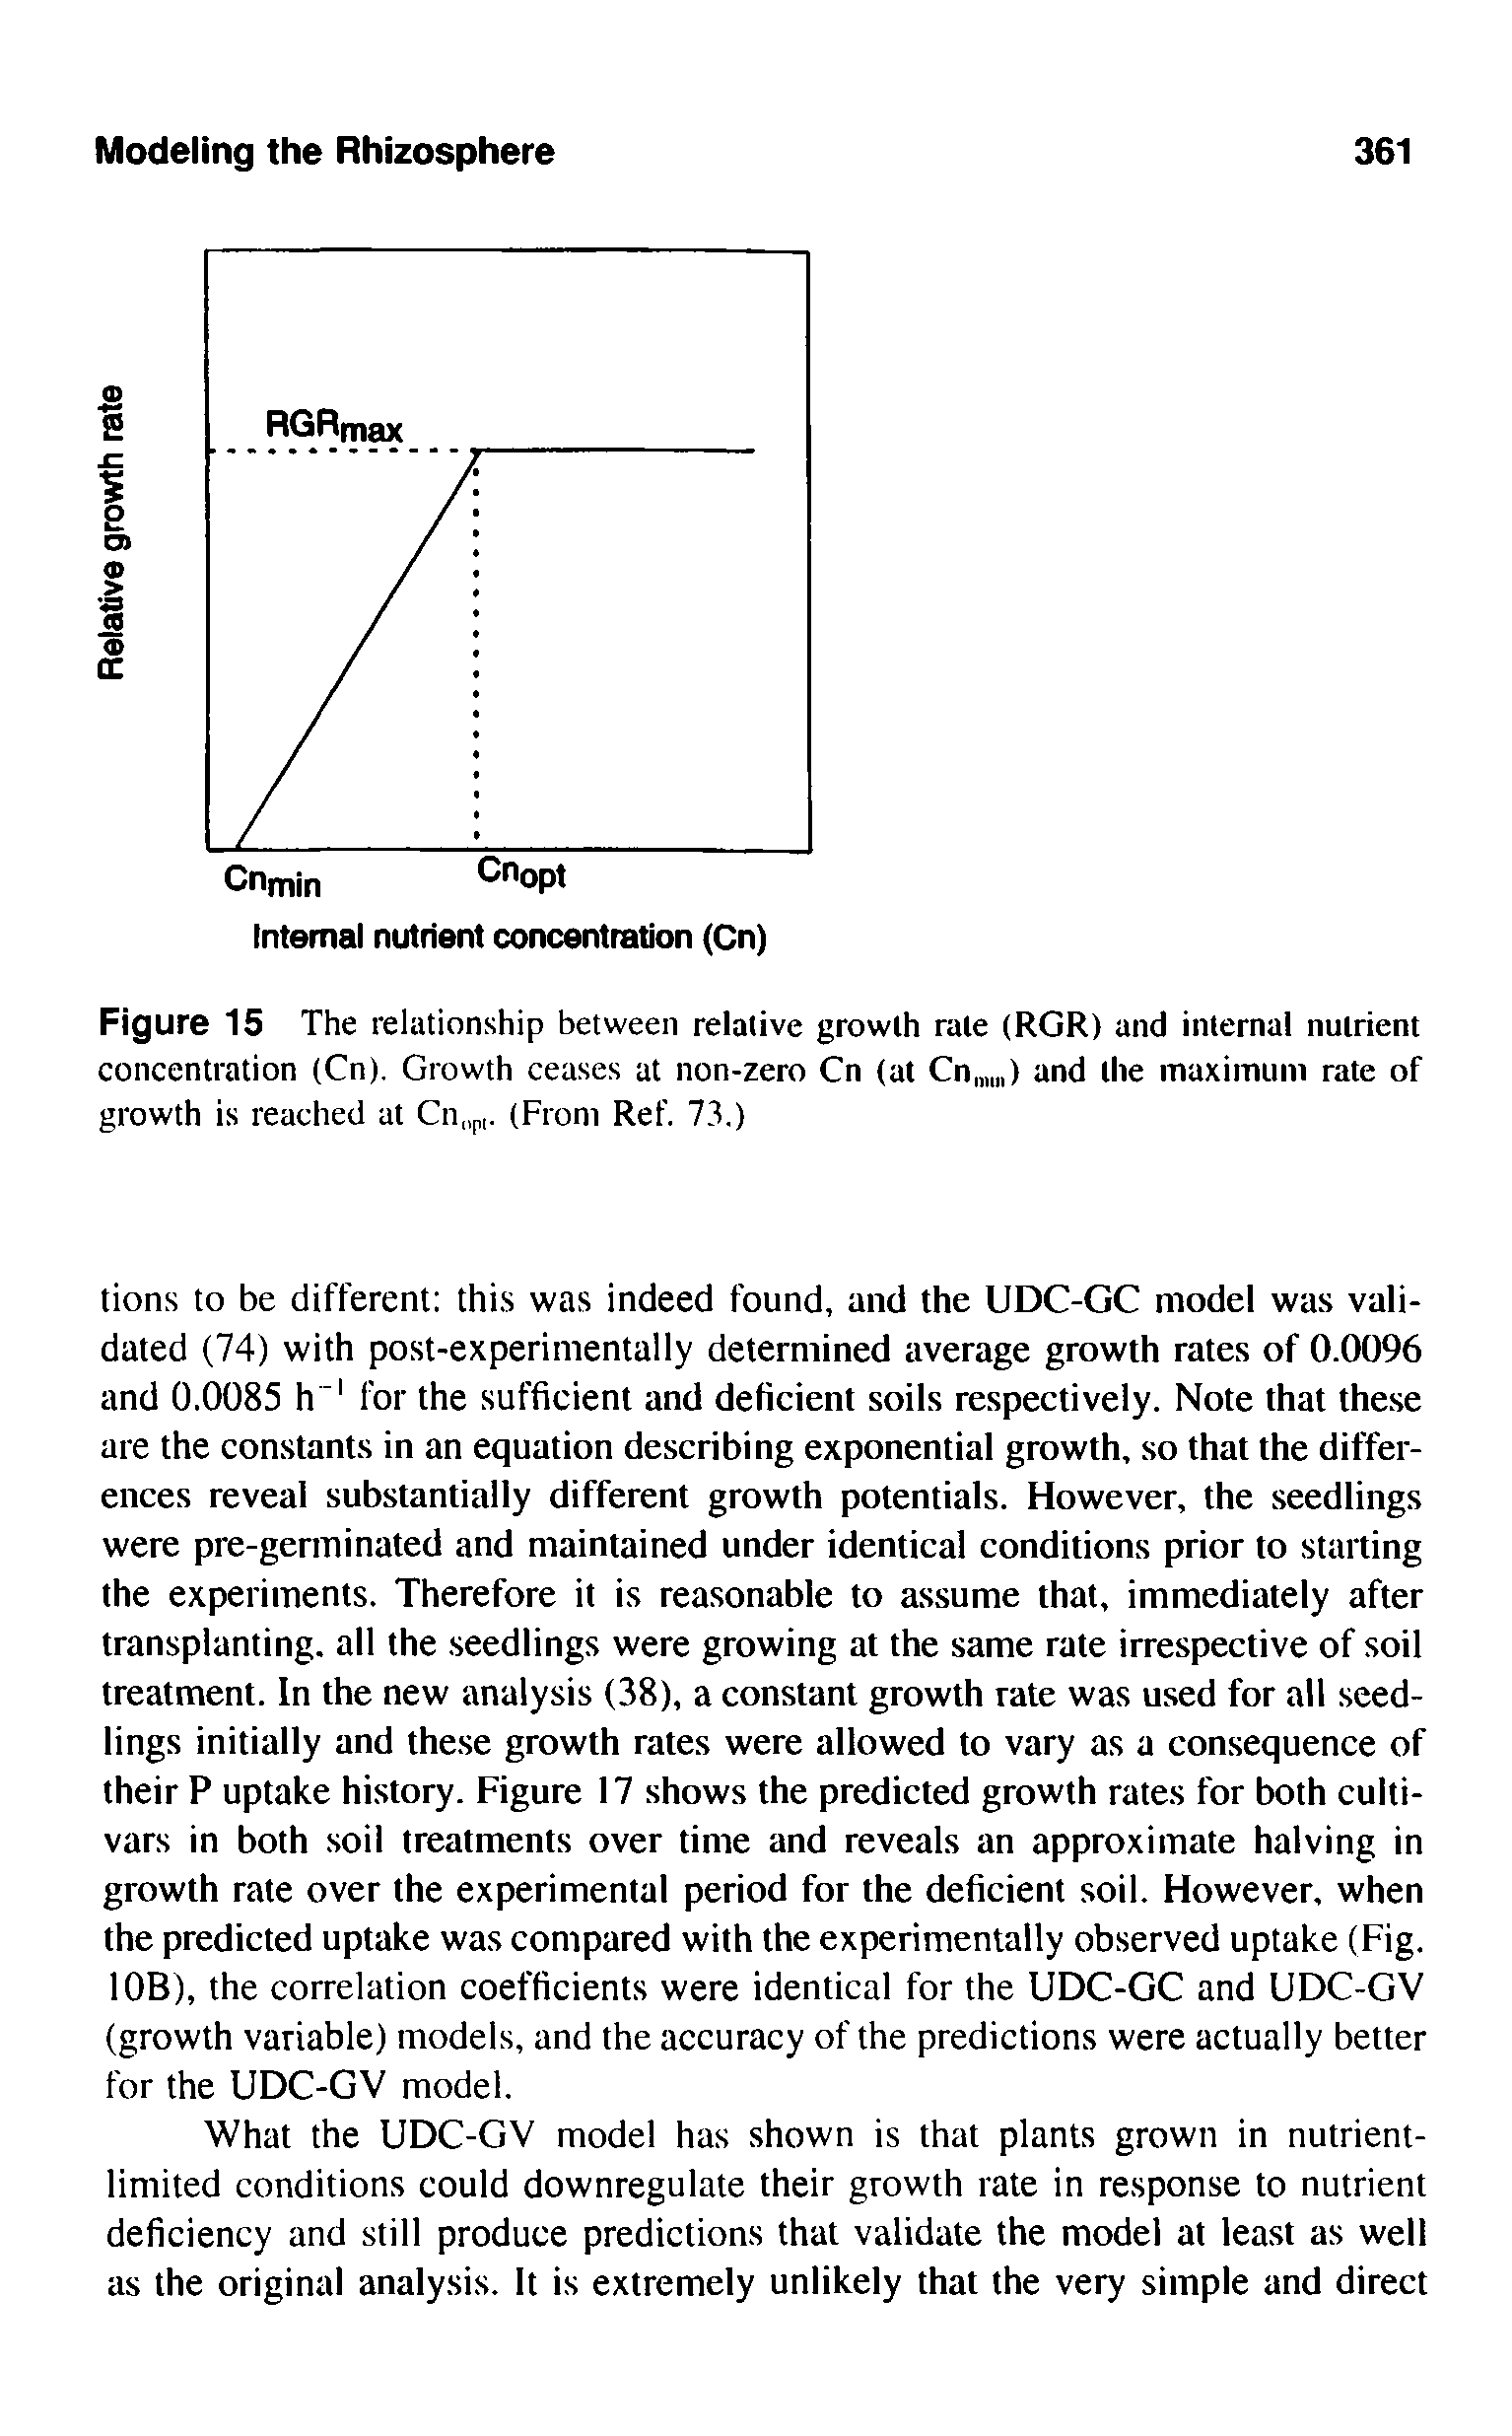 Figure 15 The relationship between relative growth rale (RGR) and internal nutrient concentration (Cn). Growth ceases at non-zero Cn (at Cn ) and the maximum rate of growth is reached at Cn p,. (From Ref. 73.)...